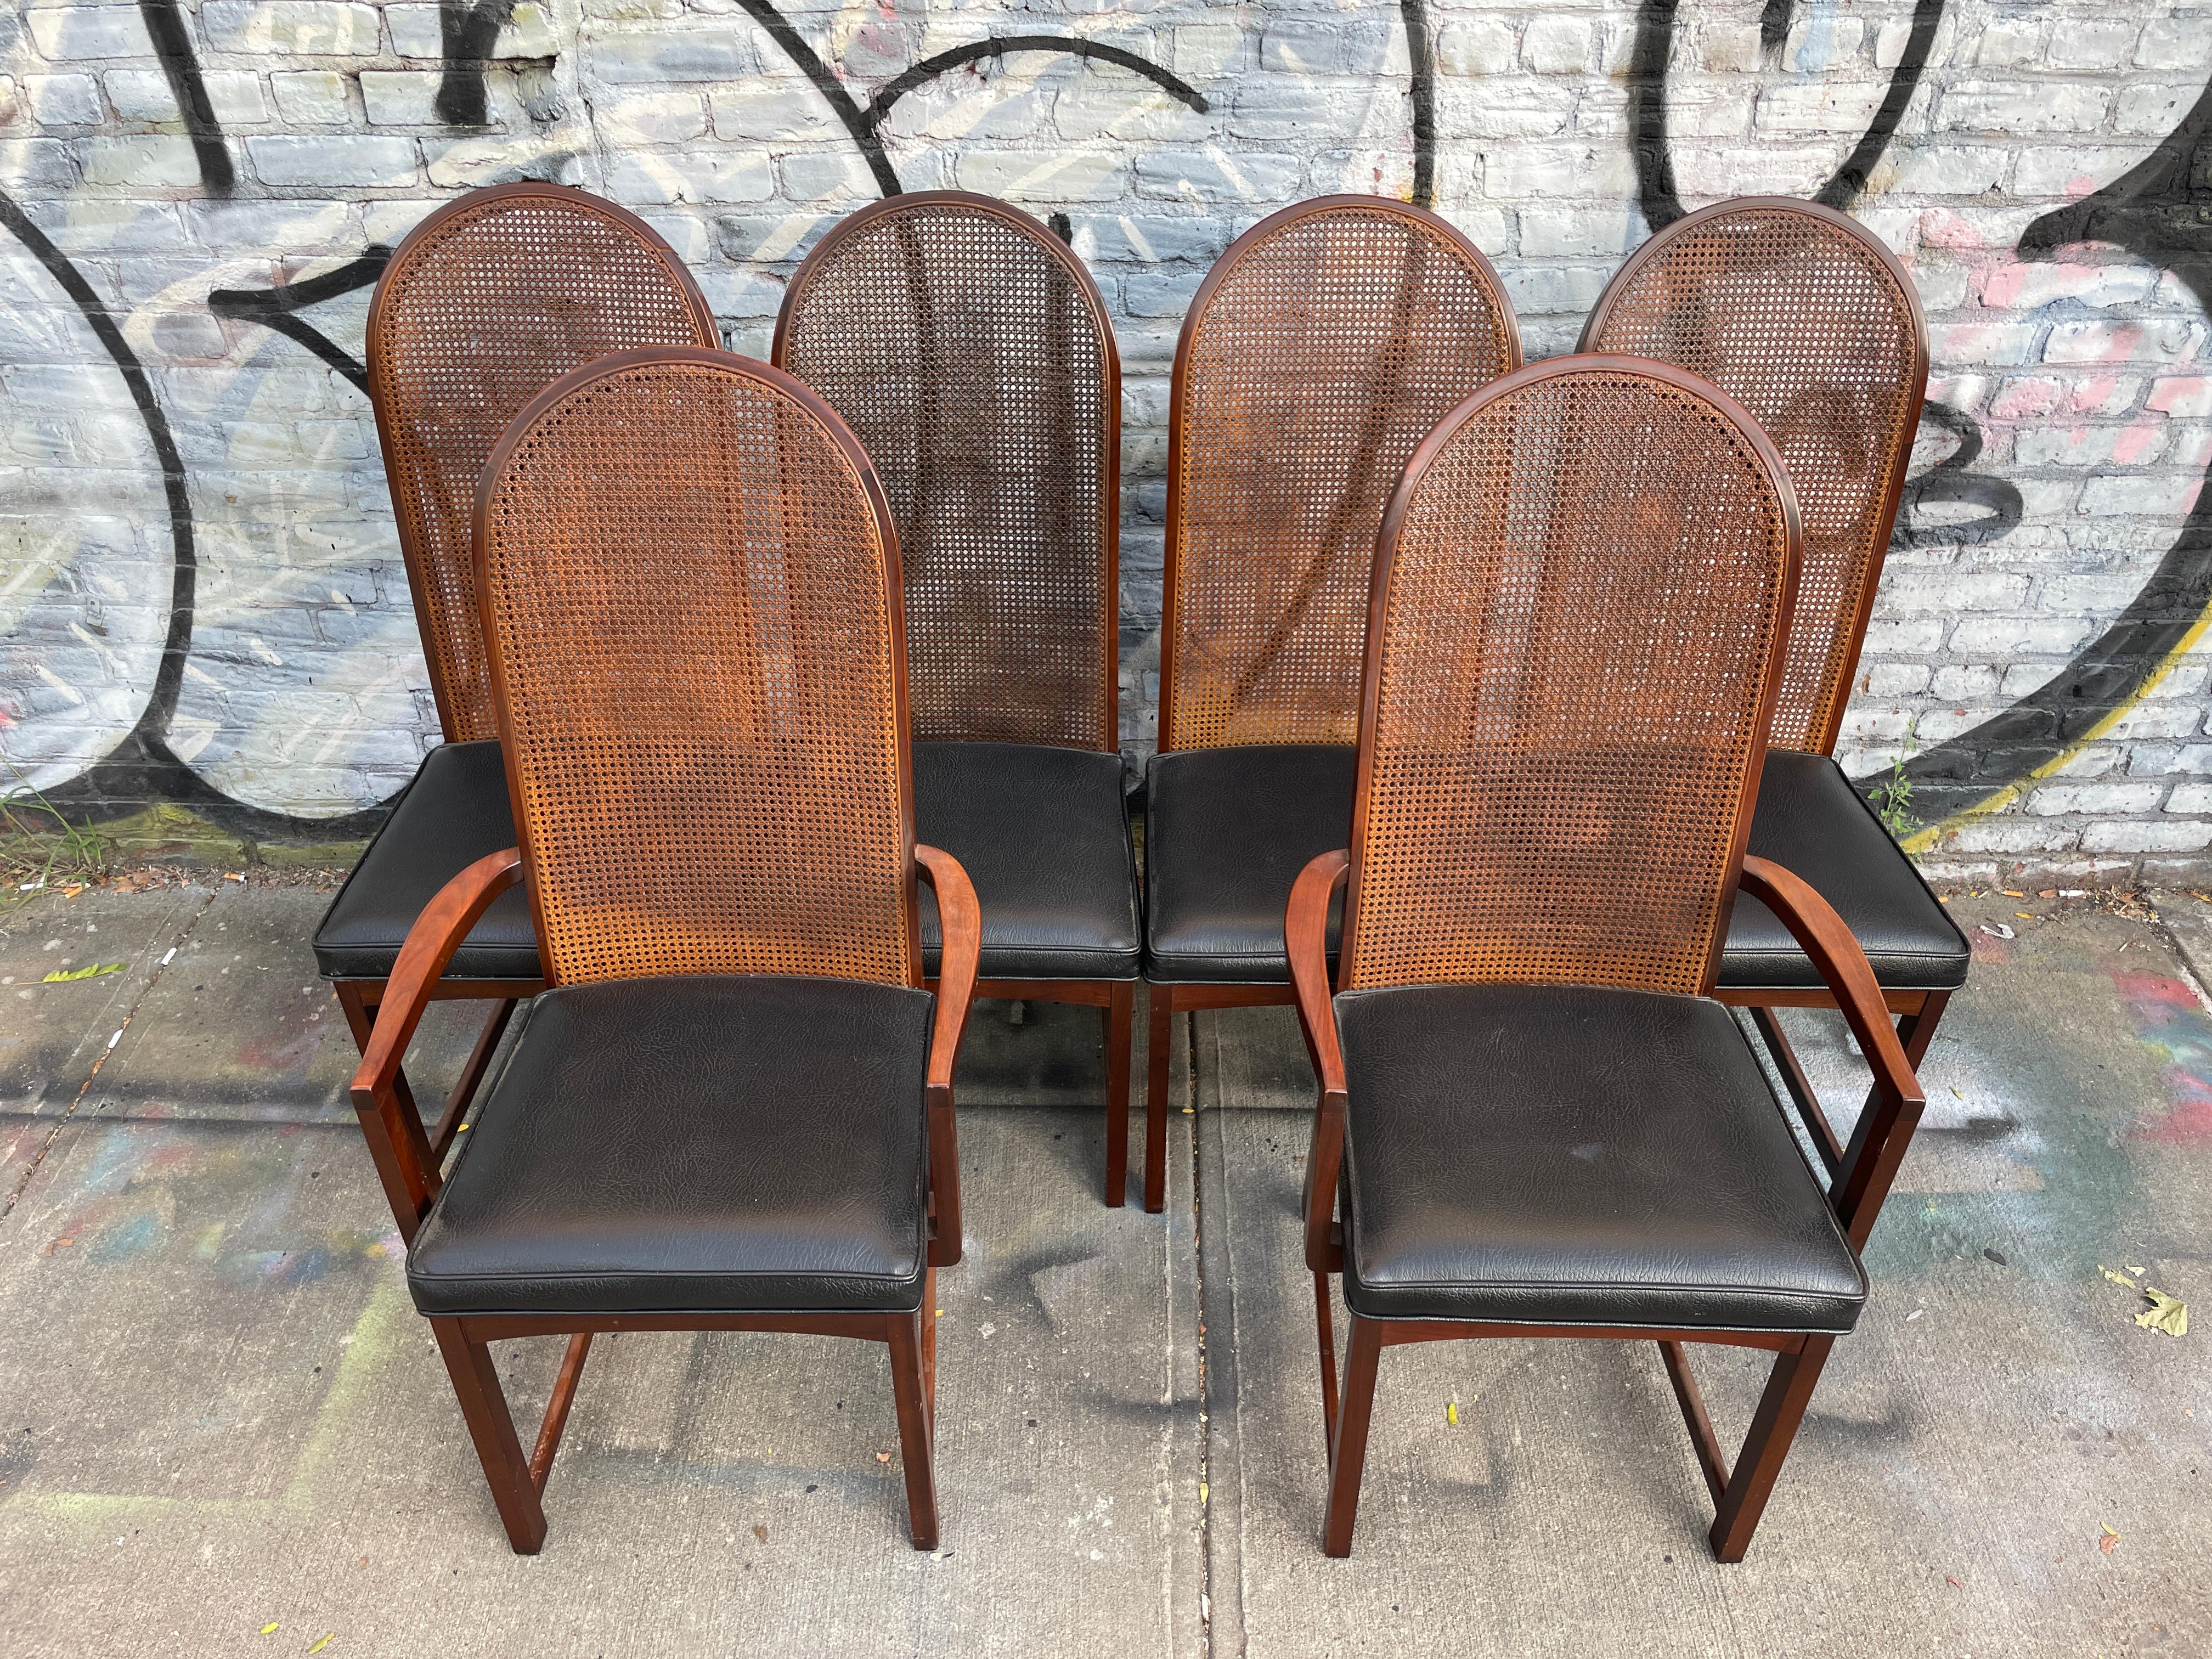 Beautiful set of 6 Milo Baughman high curved back cane dining chairs. (4) Of the chair have no arms and (2) chairs have arms - all have all the same black vinyl faux leather upholstery. Beautiful simple design very comfortable. Very easy to